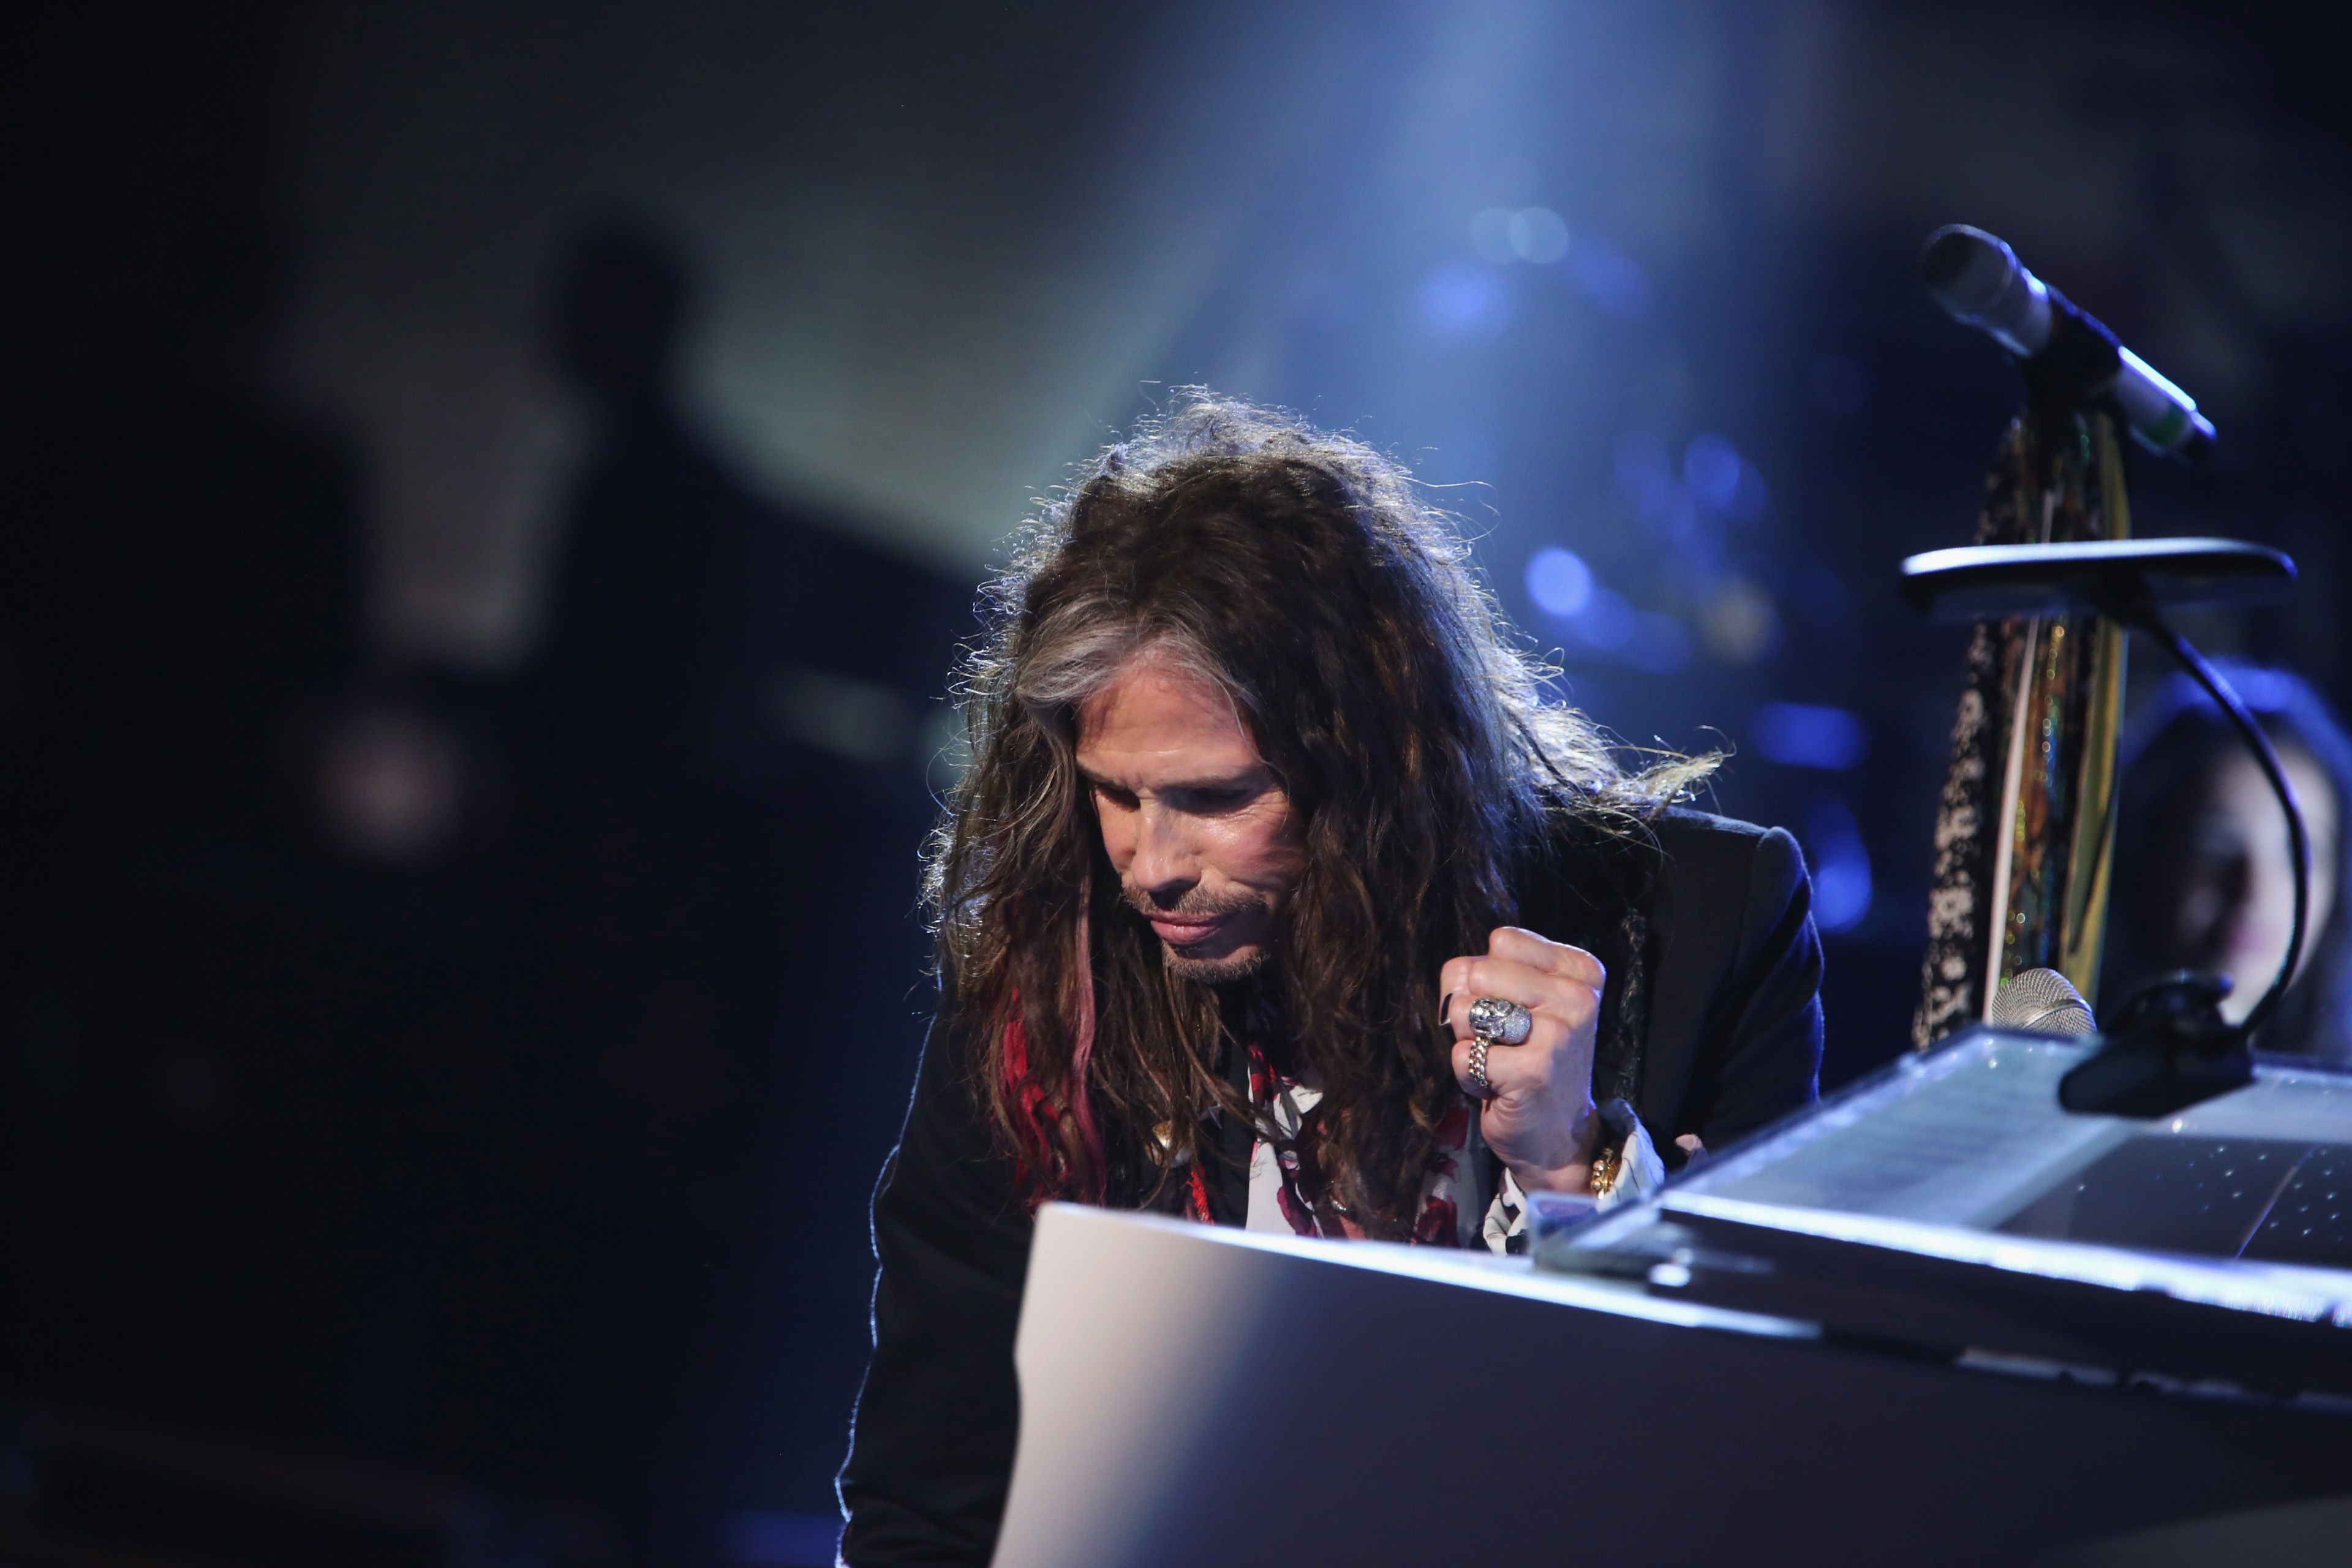 ROME, ITALY - SEPTEMBER 08: Steven Tyler performs at the Andrea Bocelli show as part of the 2017 Celebrity Fight Night in Italy Benefiting The Andrea Bocelli Foundation and the Muhammad Ali Parkinson Center on September 8, 2017 in Rome, Italy. (Photo by Jonathan Leibson/Getty Images for Celebrity Fight Night)